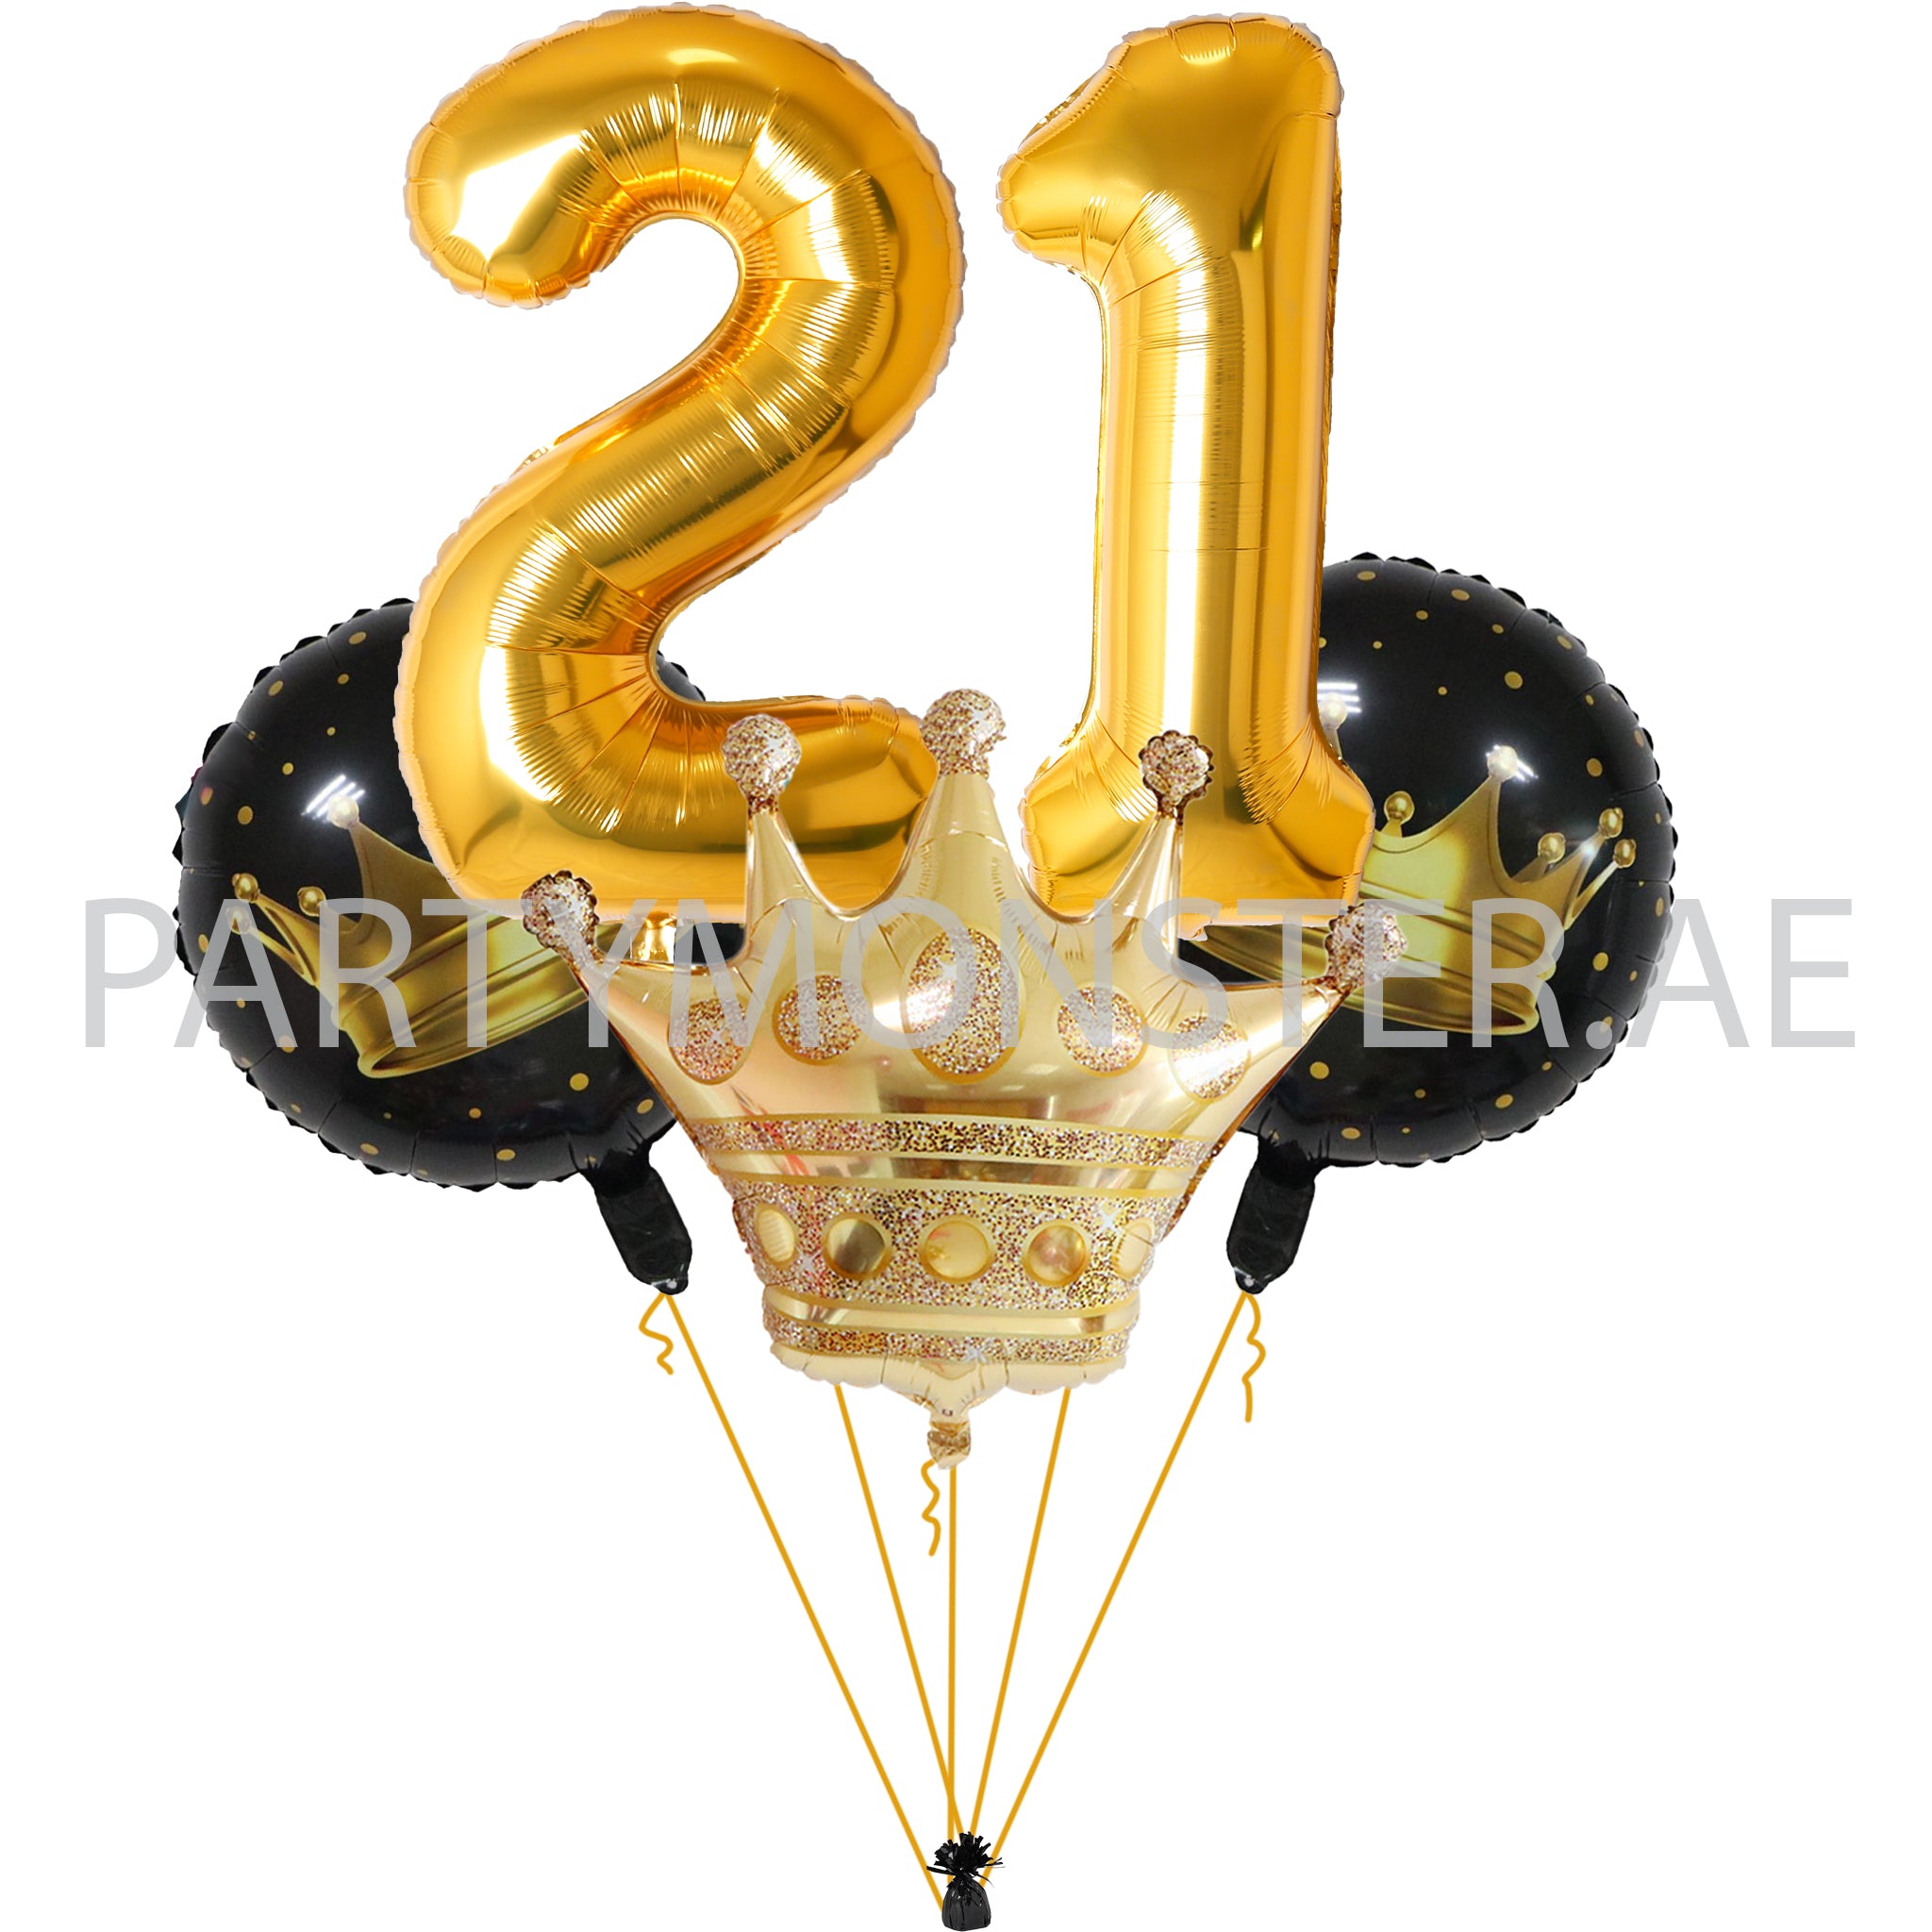 crown themed birthday party balloons delivery in Dubai